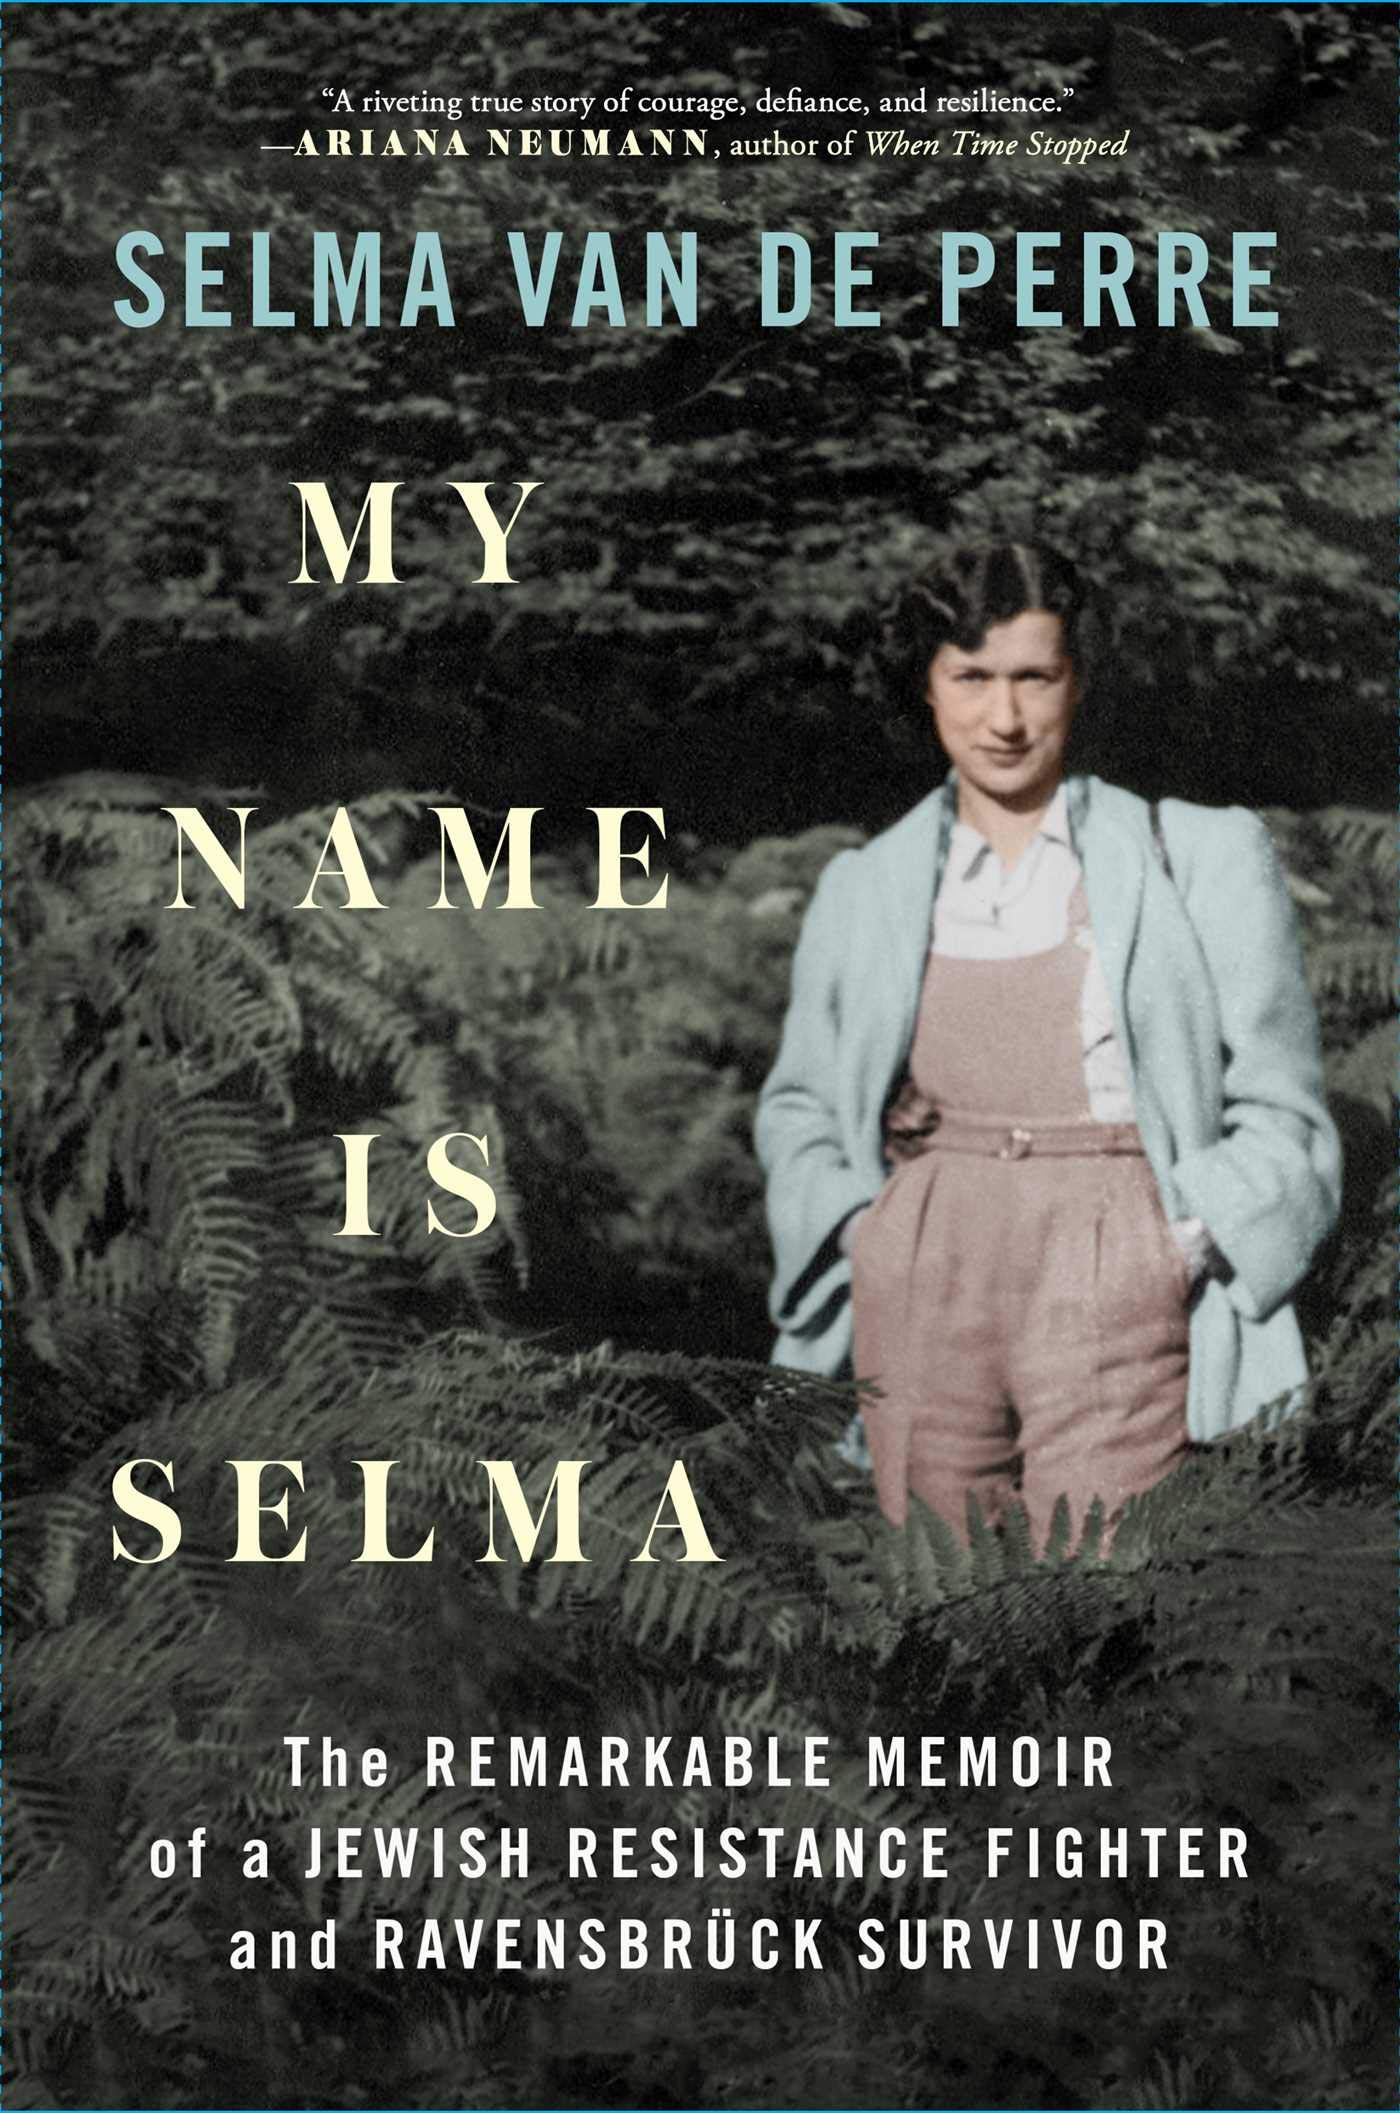 Image for "My Name Is Selma"